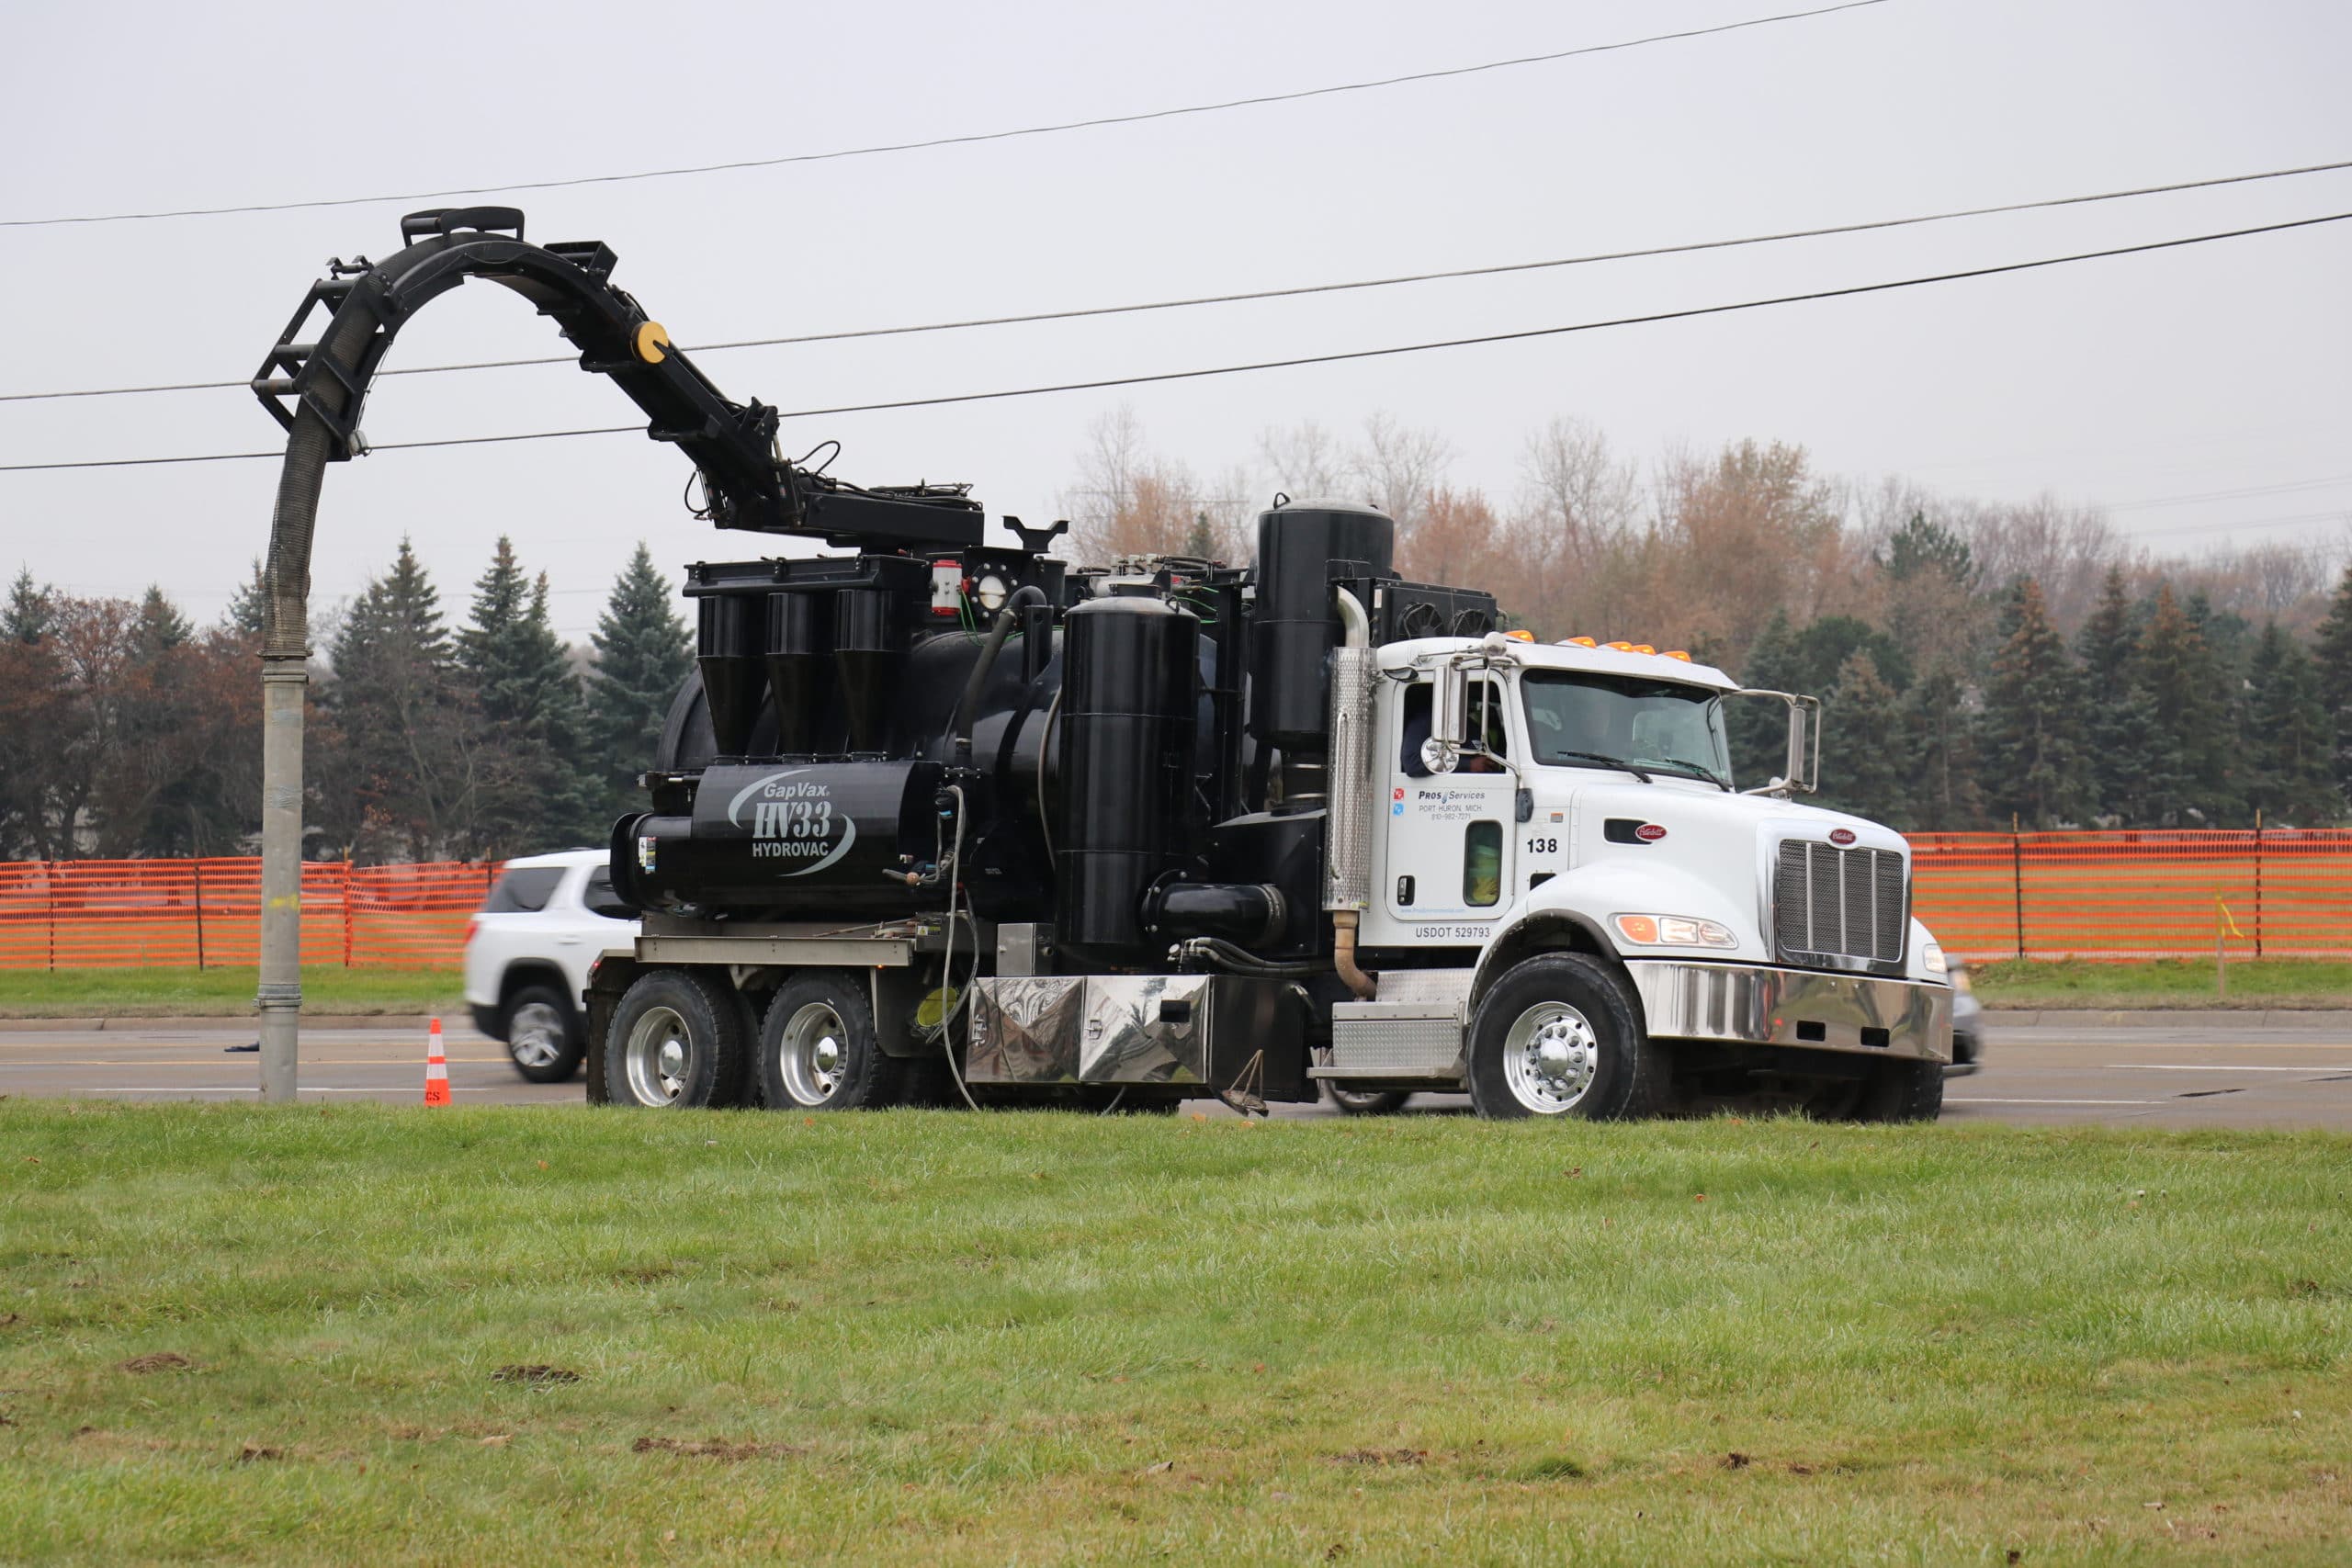 Hydro excavation truck in operation on a Detroit field, showcasing precise and environmentally-friendly excavation method.